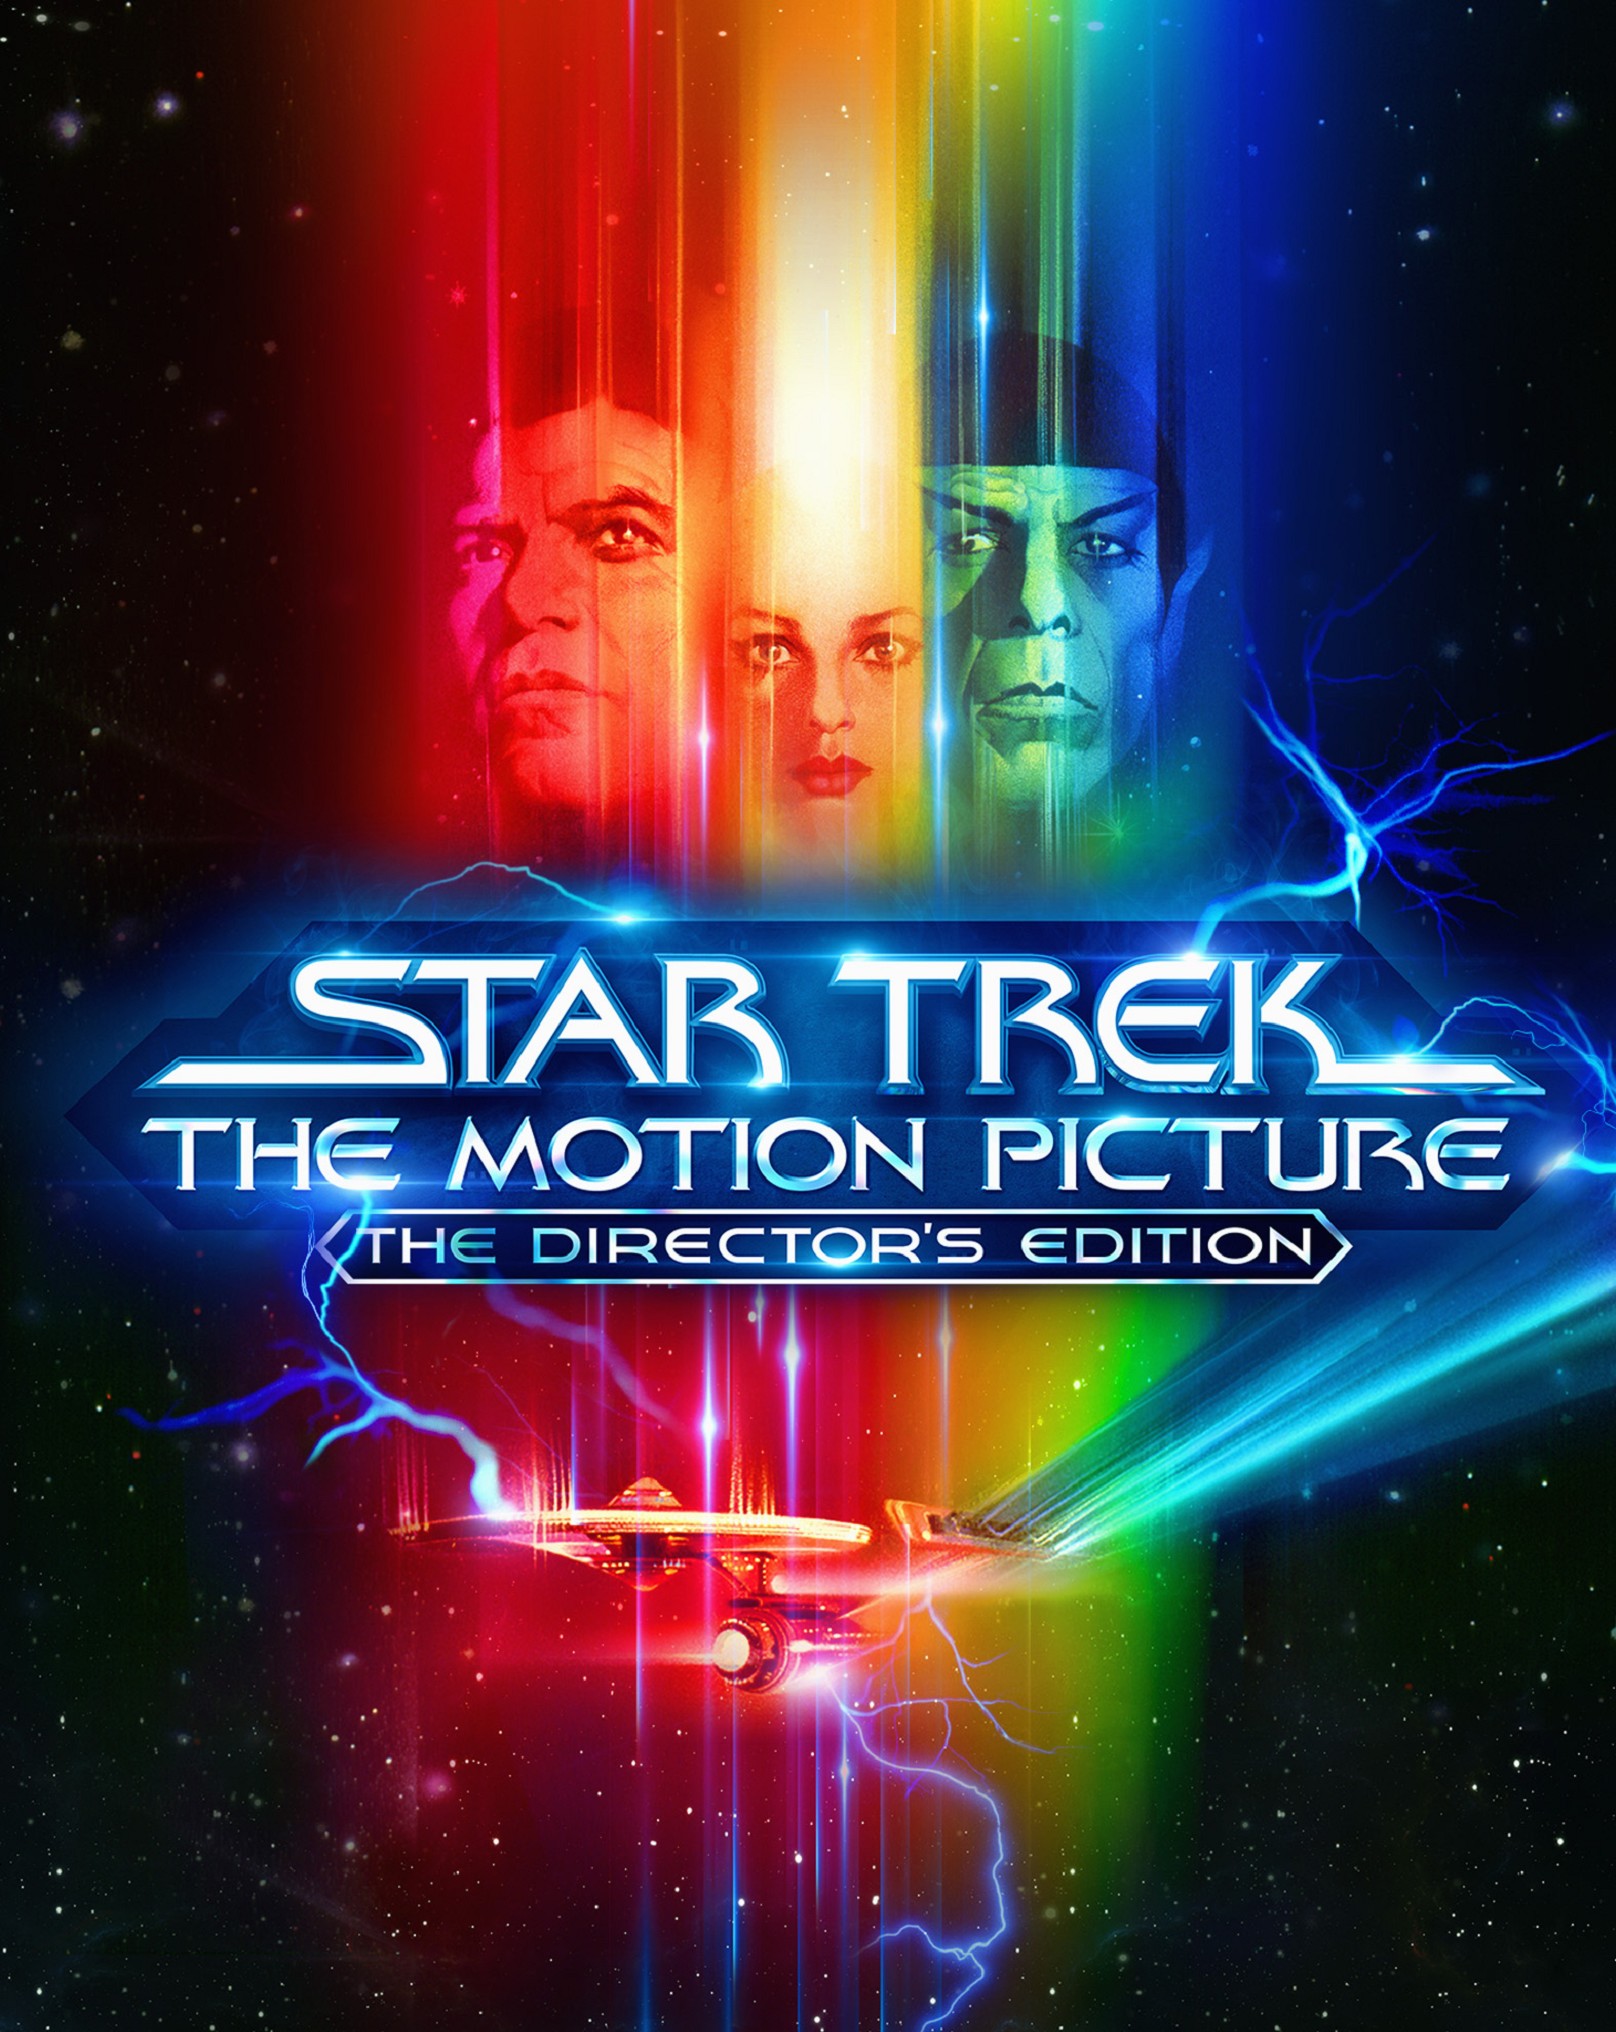 STAR TREK IN 4K - THE MOTION PICTURE (The Director's Edition) + THE WRATH OF KHAN BACK ON THE BIG SCREEN